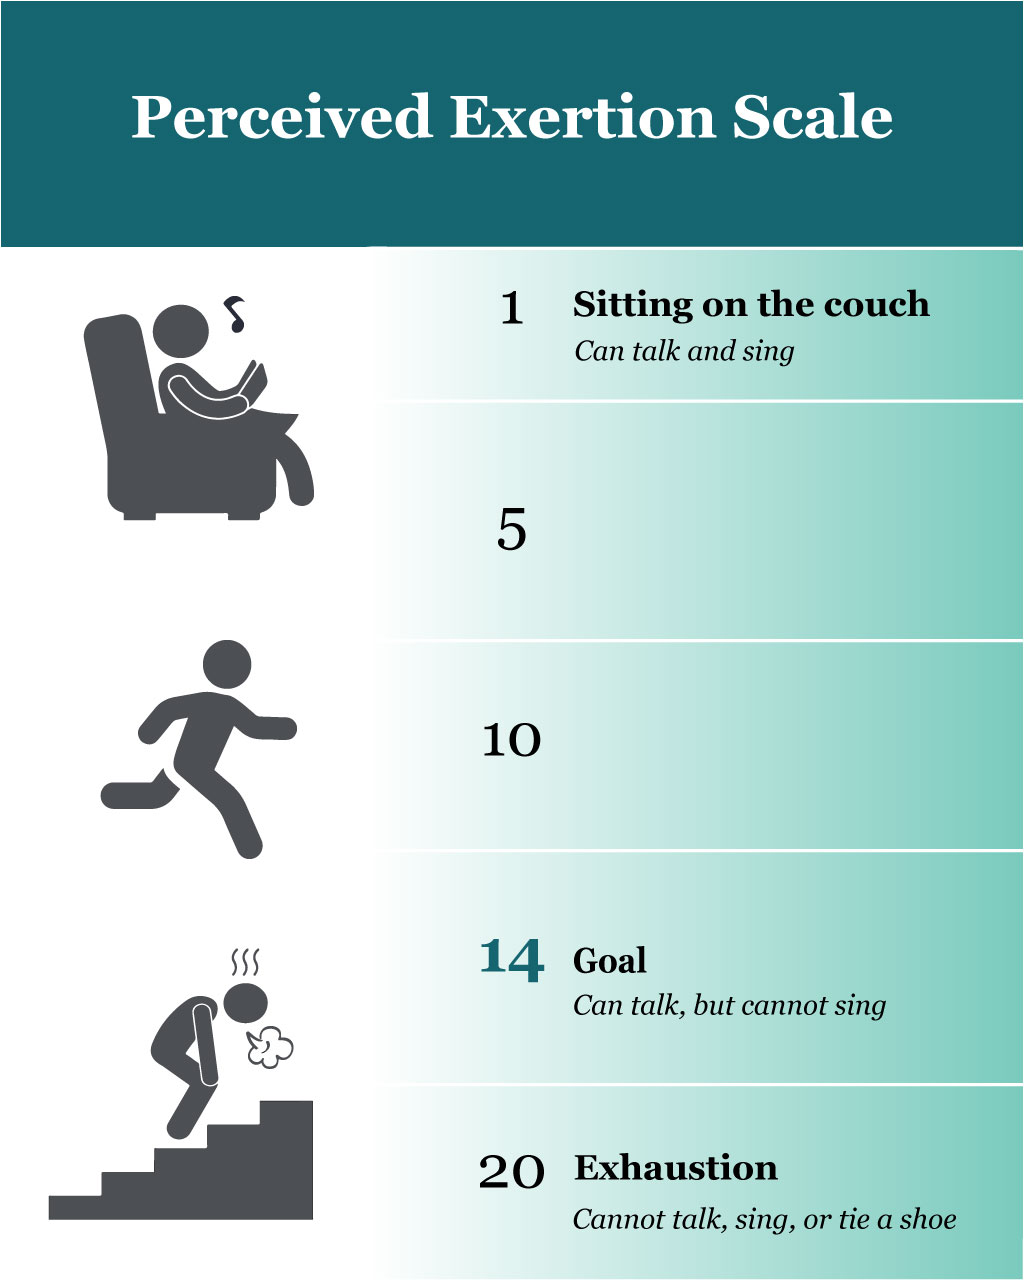 Preceived Exertion Scale graphic where 1 represents "Sitting on the couch: Can talk and sing and 20 represents Exhaustion: Cannot talk, sing, or tie a shoe. The goal has been set at 14 where one can talk, but cannot sing.